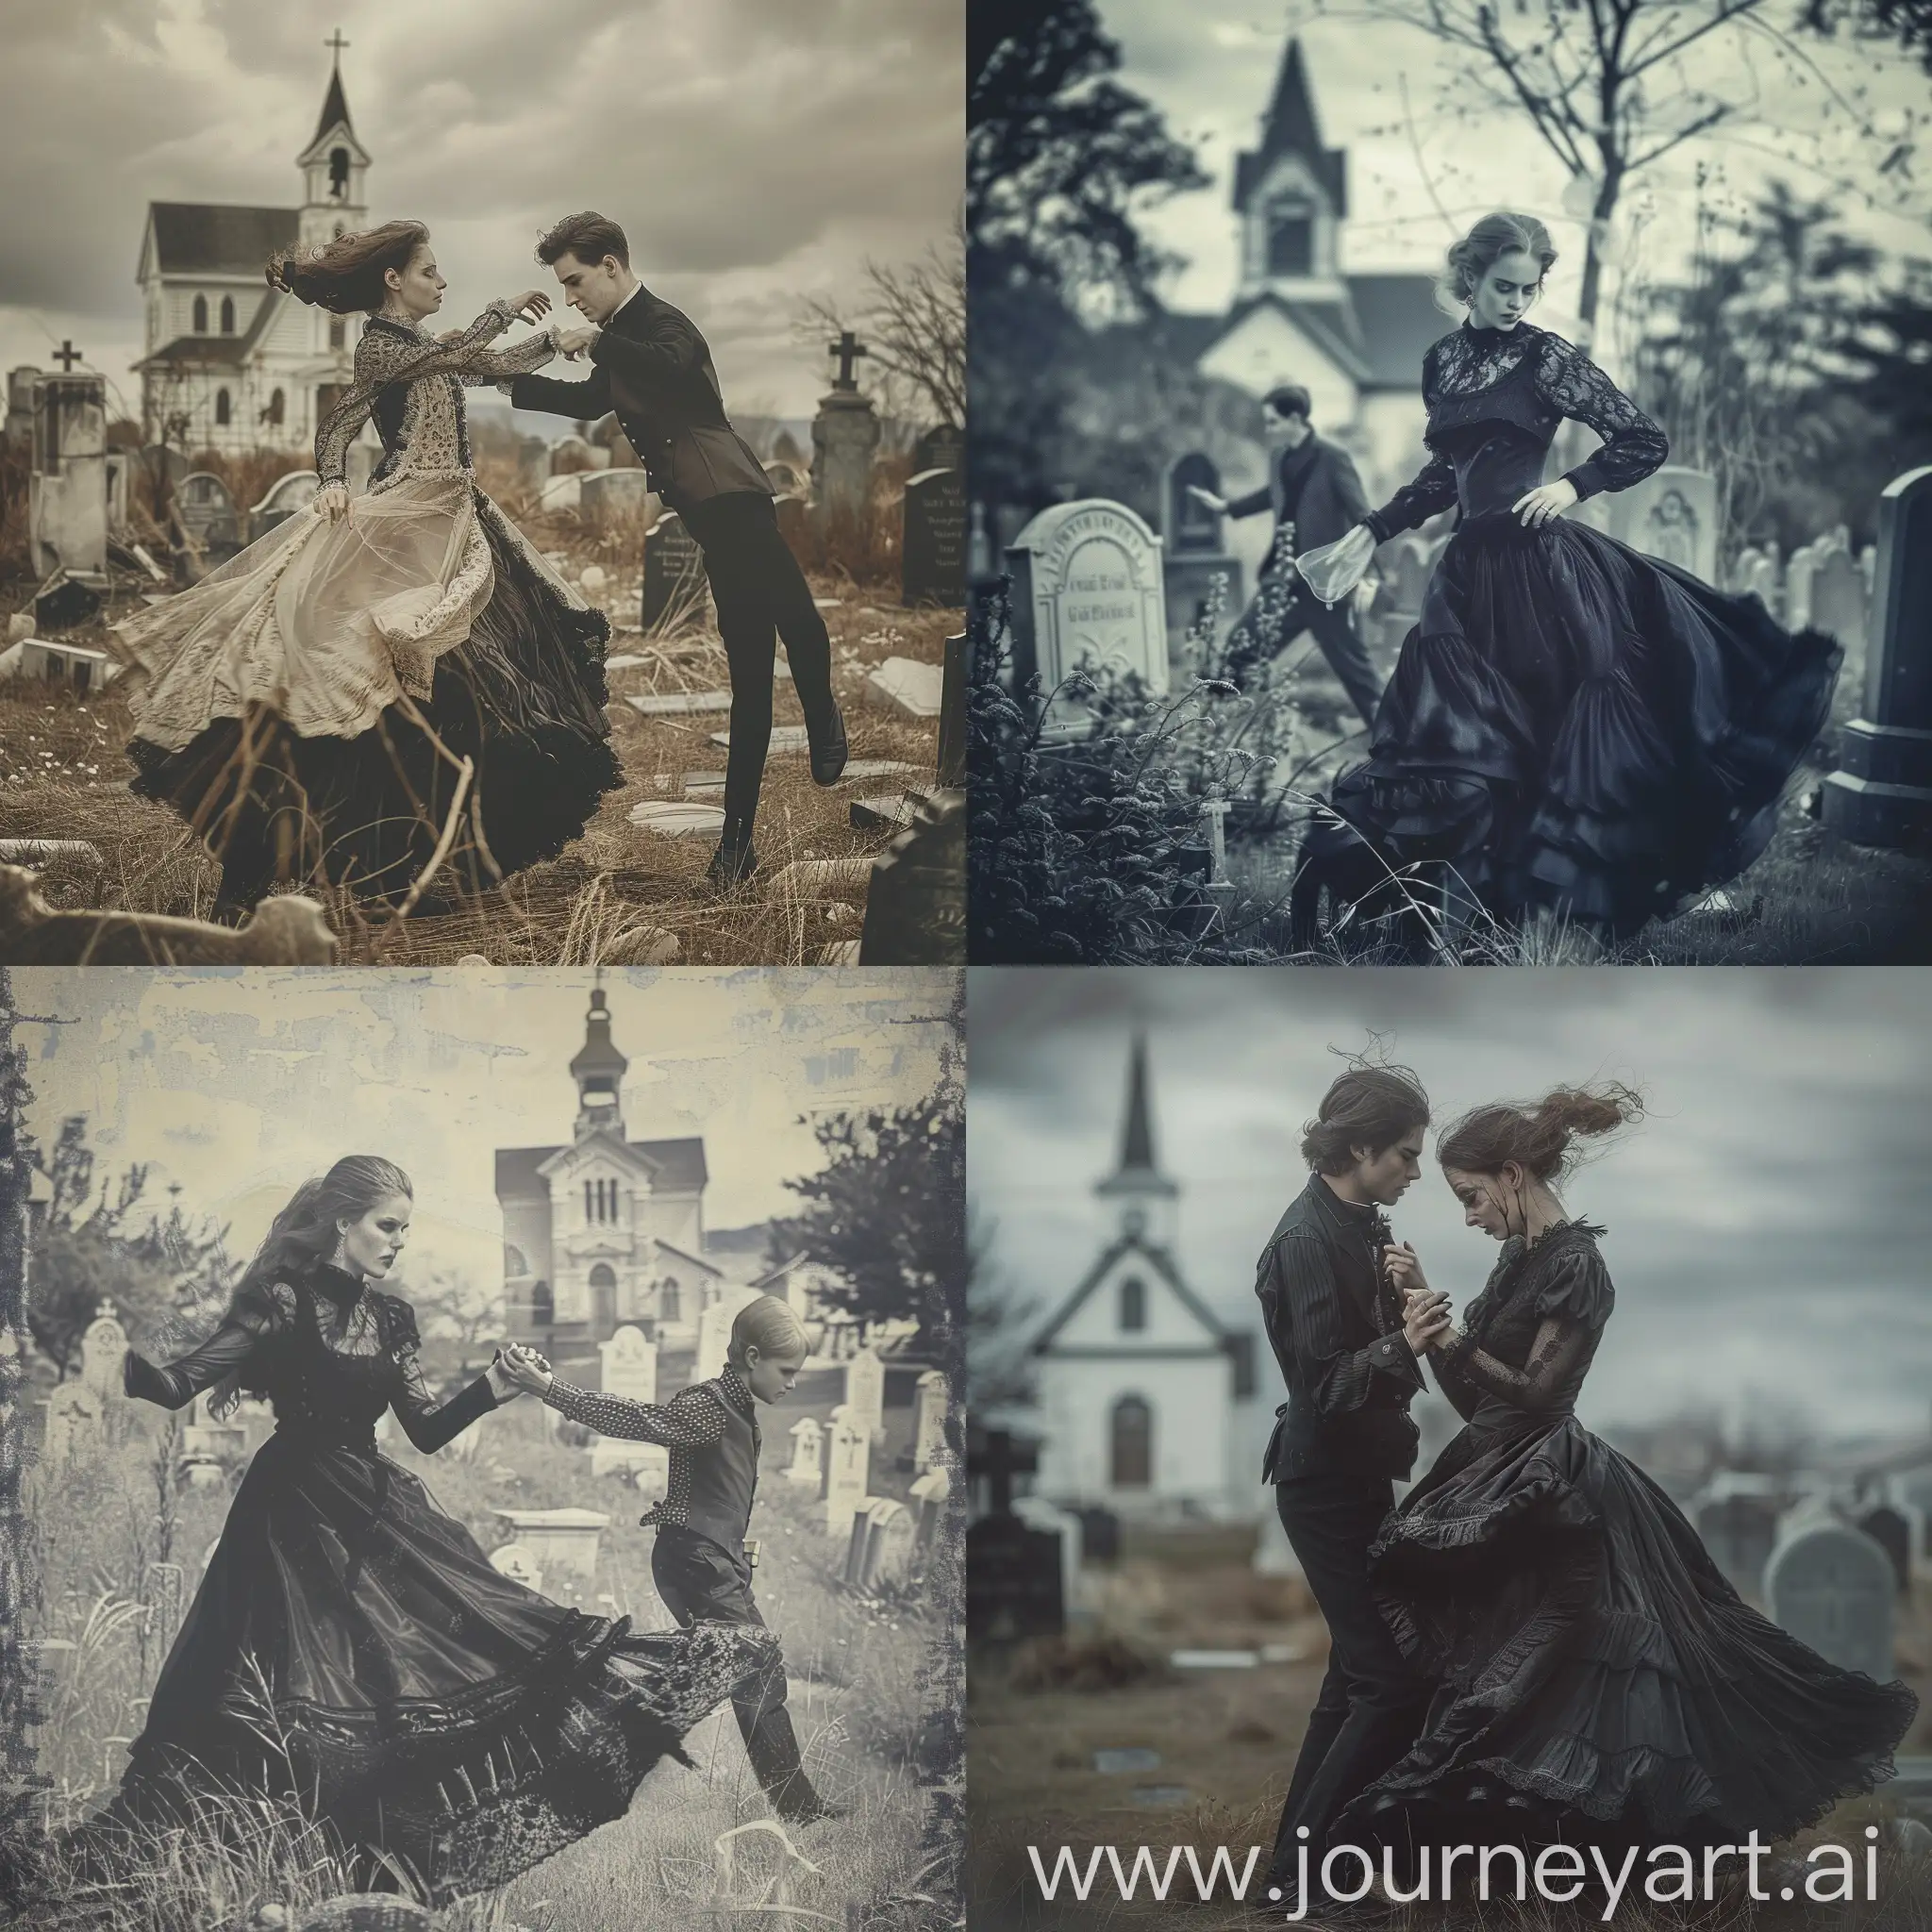 A photographic image of a beautiful sad Victorian woman dancing with a ghostly young Victorian man in a haunted  cemetery. In the background is a church.